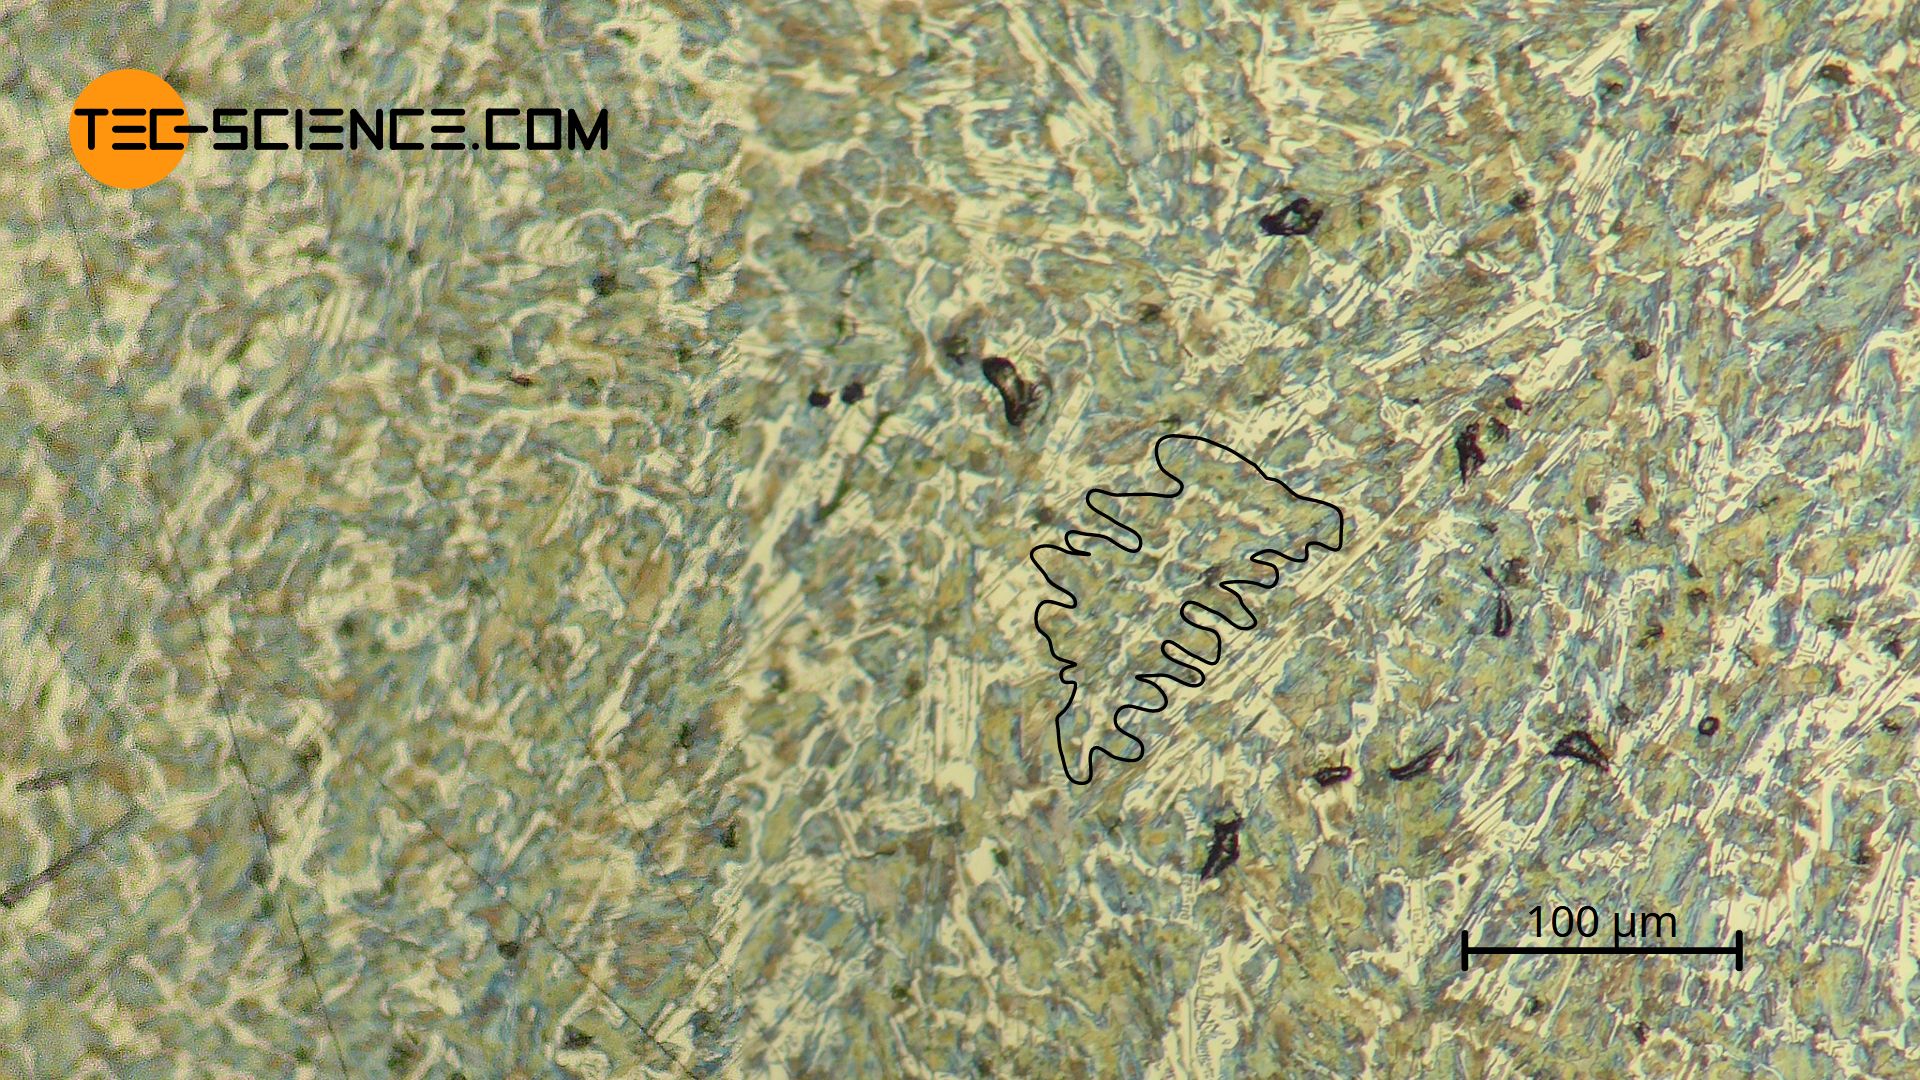 Micrograph of hypoeutectic cast iron with a carbon content of 2.7 %.